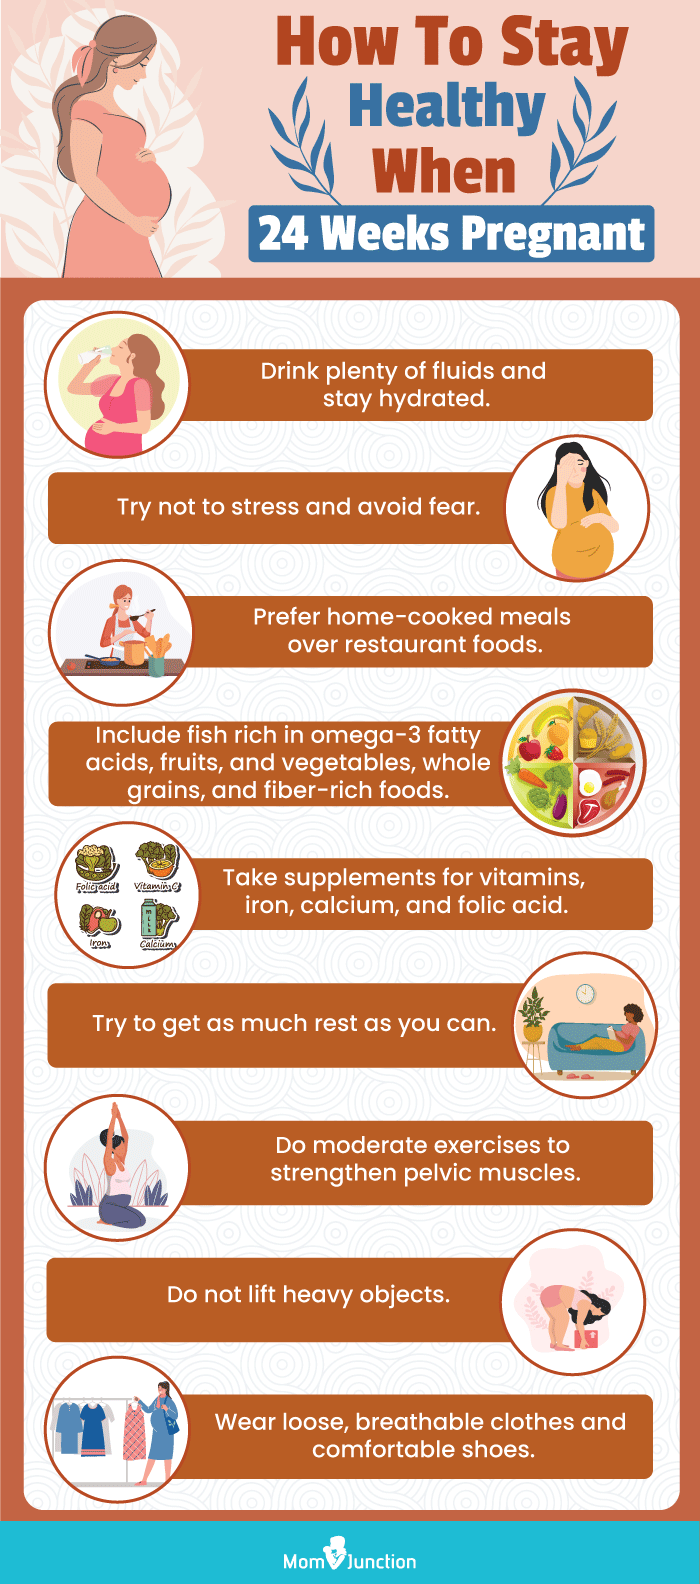 how to stay healthy when 24 weeks pregnant (infographic)